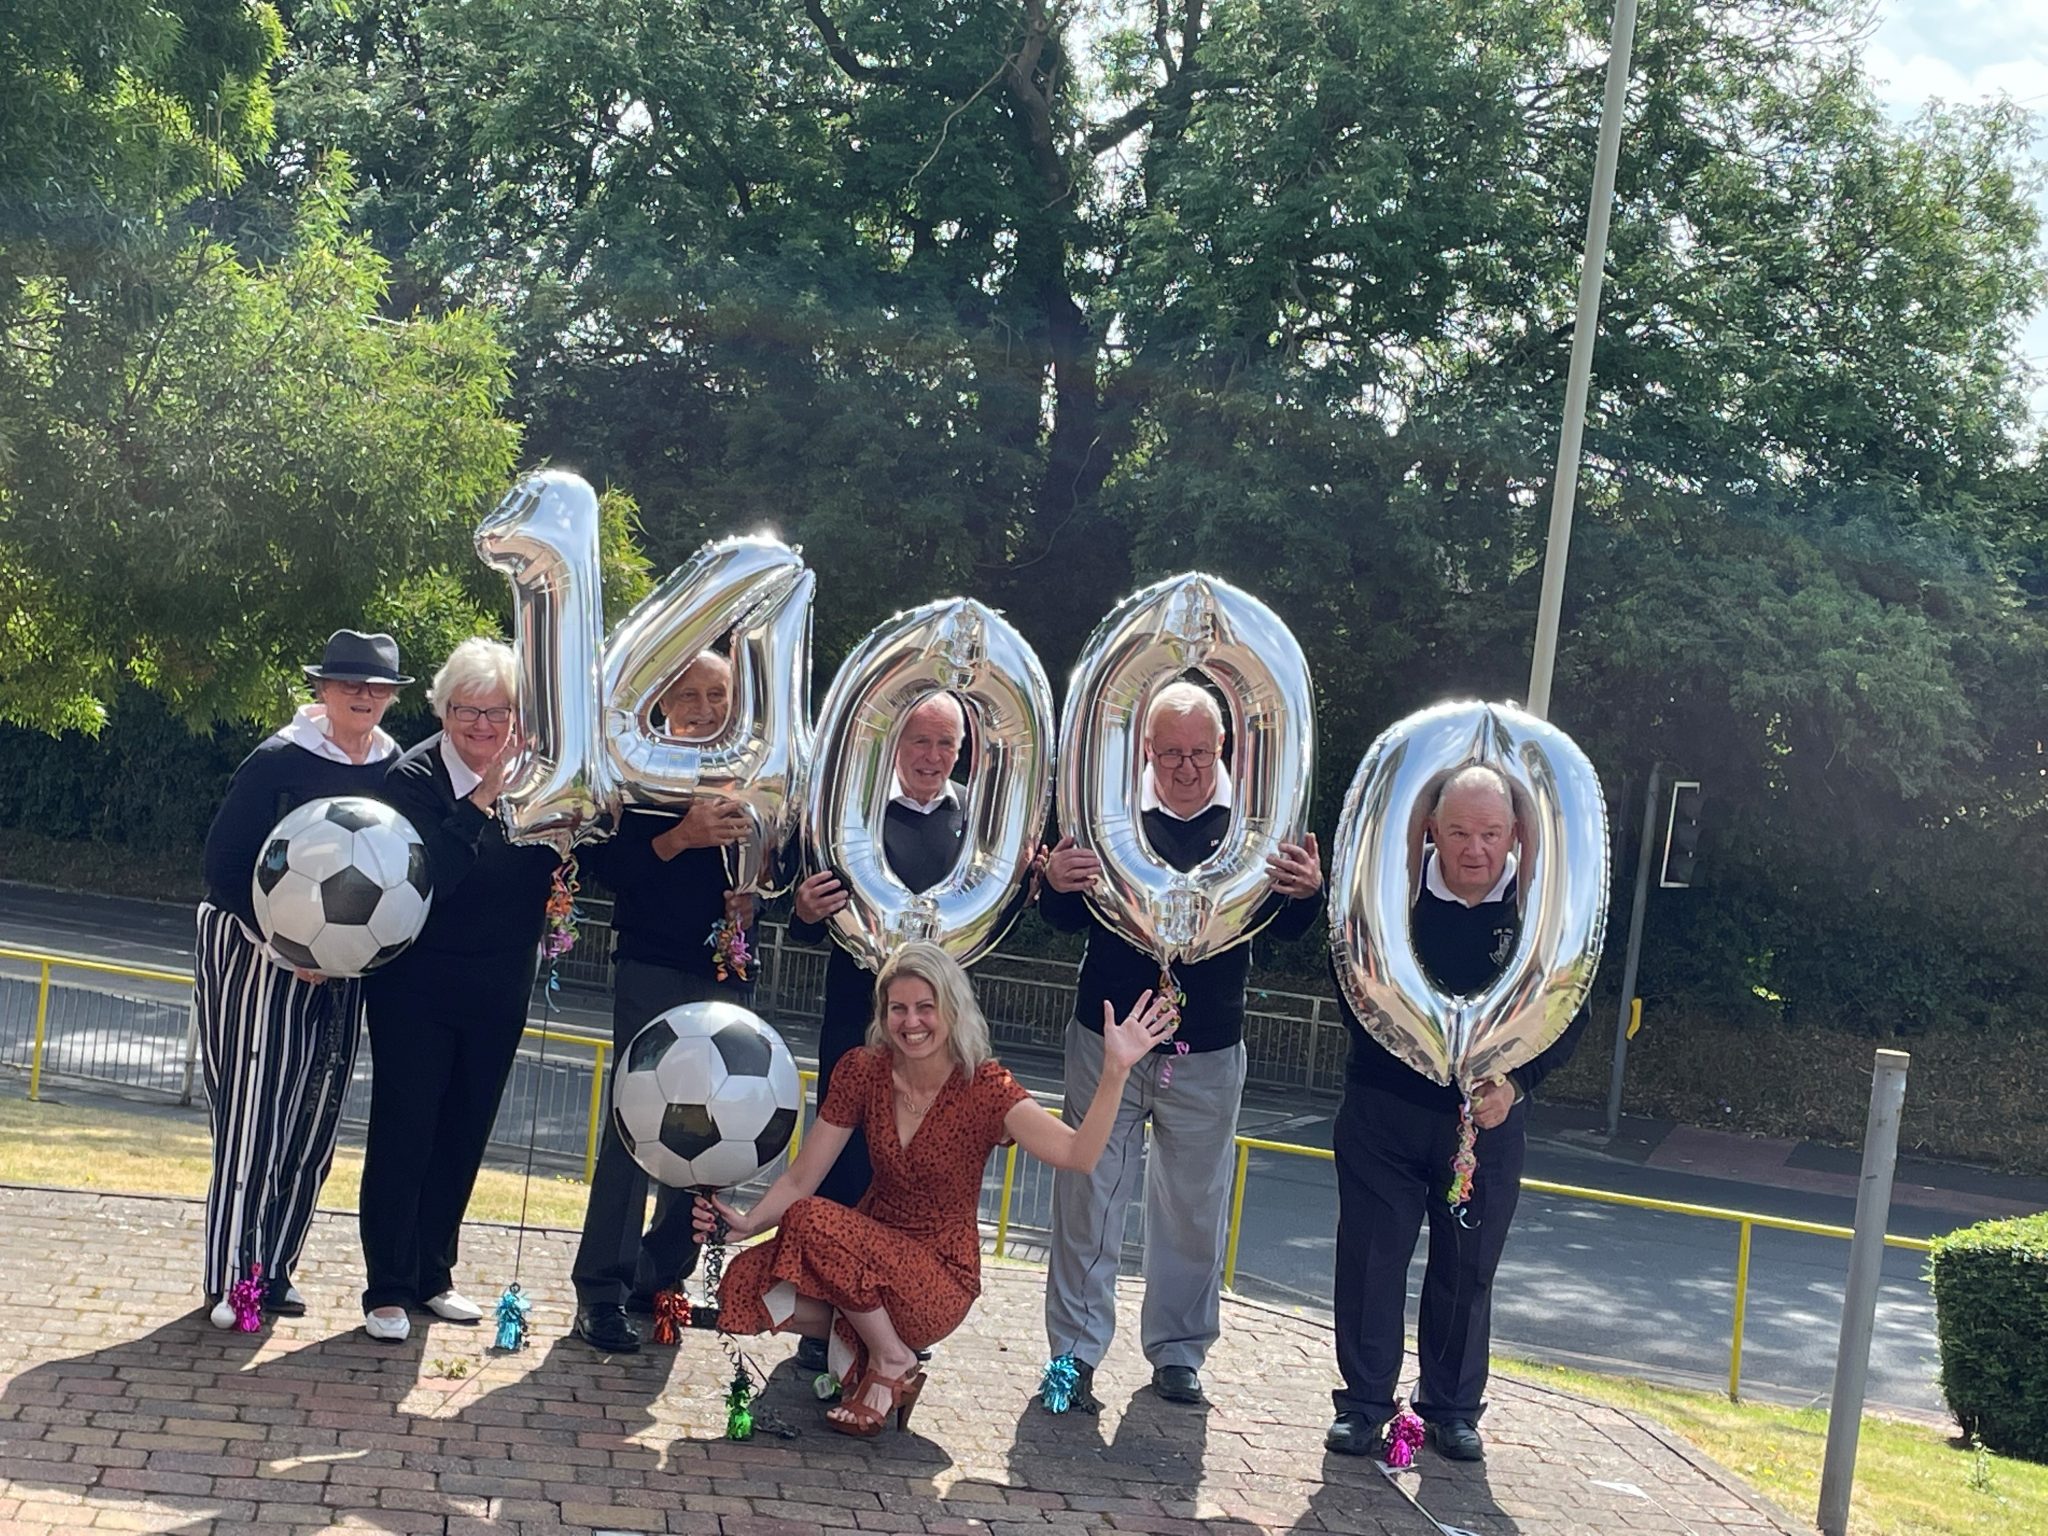 This shows organisers of the JW Hunt Cup with Kathy Roper, chair of trustees at Beacon with Chief Executive Lisa Cowley. They are holding inflatable balloons that spell 14,000 